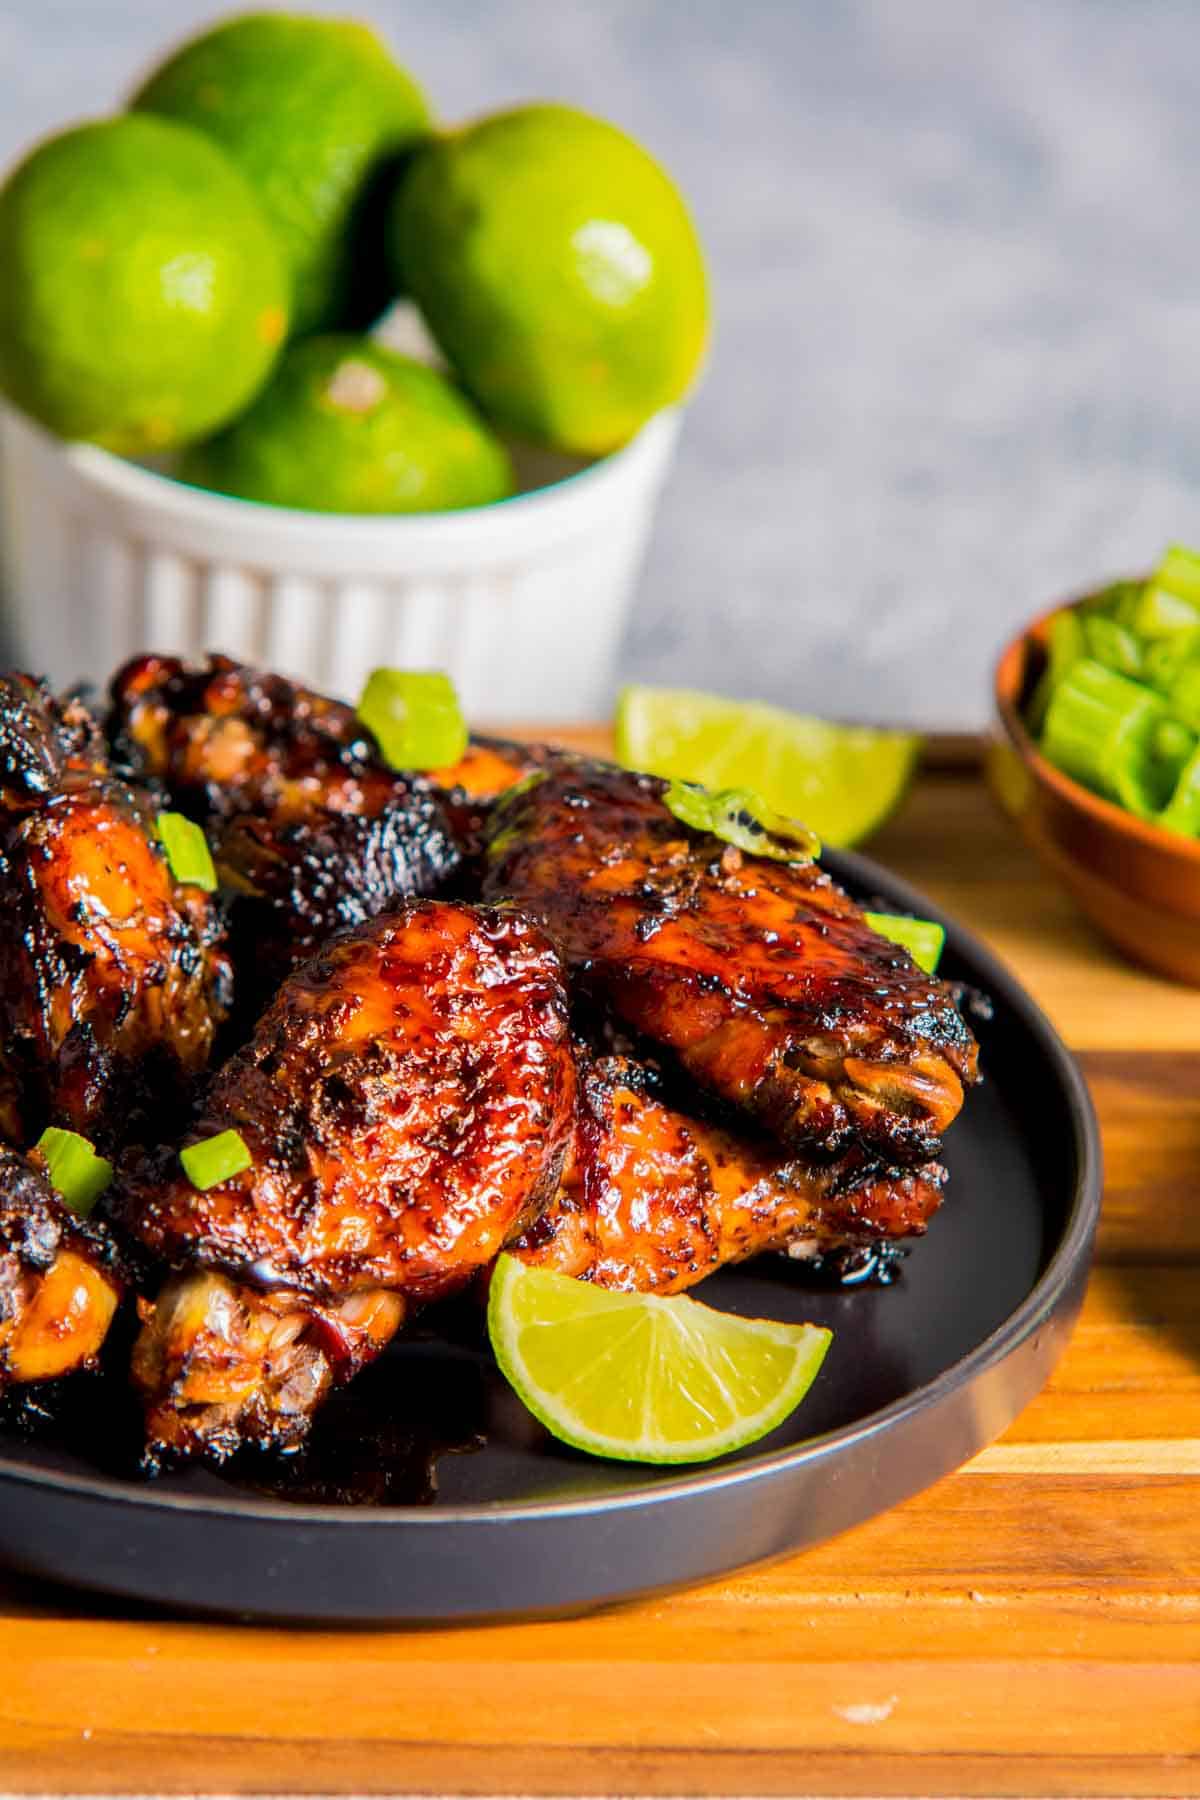 chicken wings on a plate with limes on the side